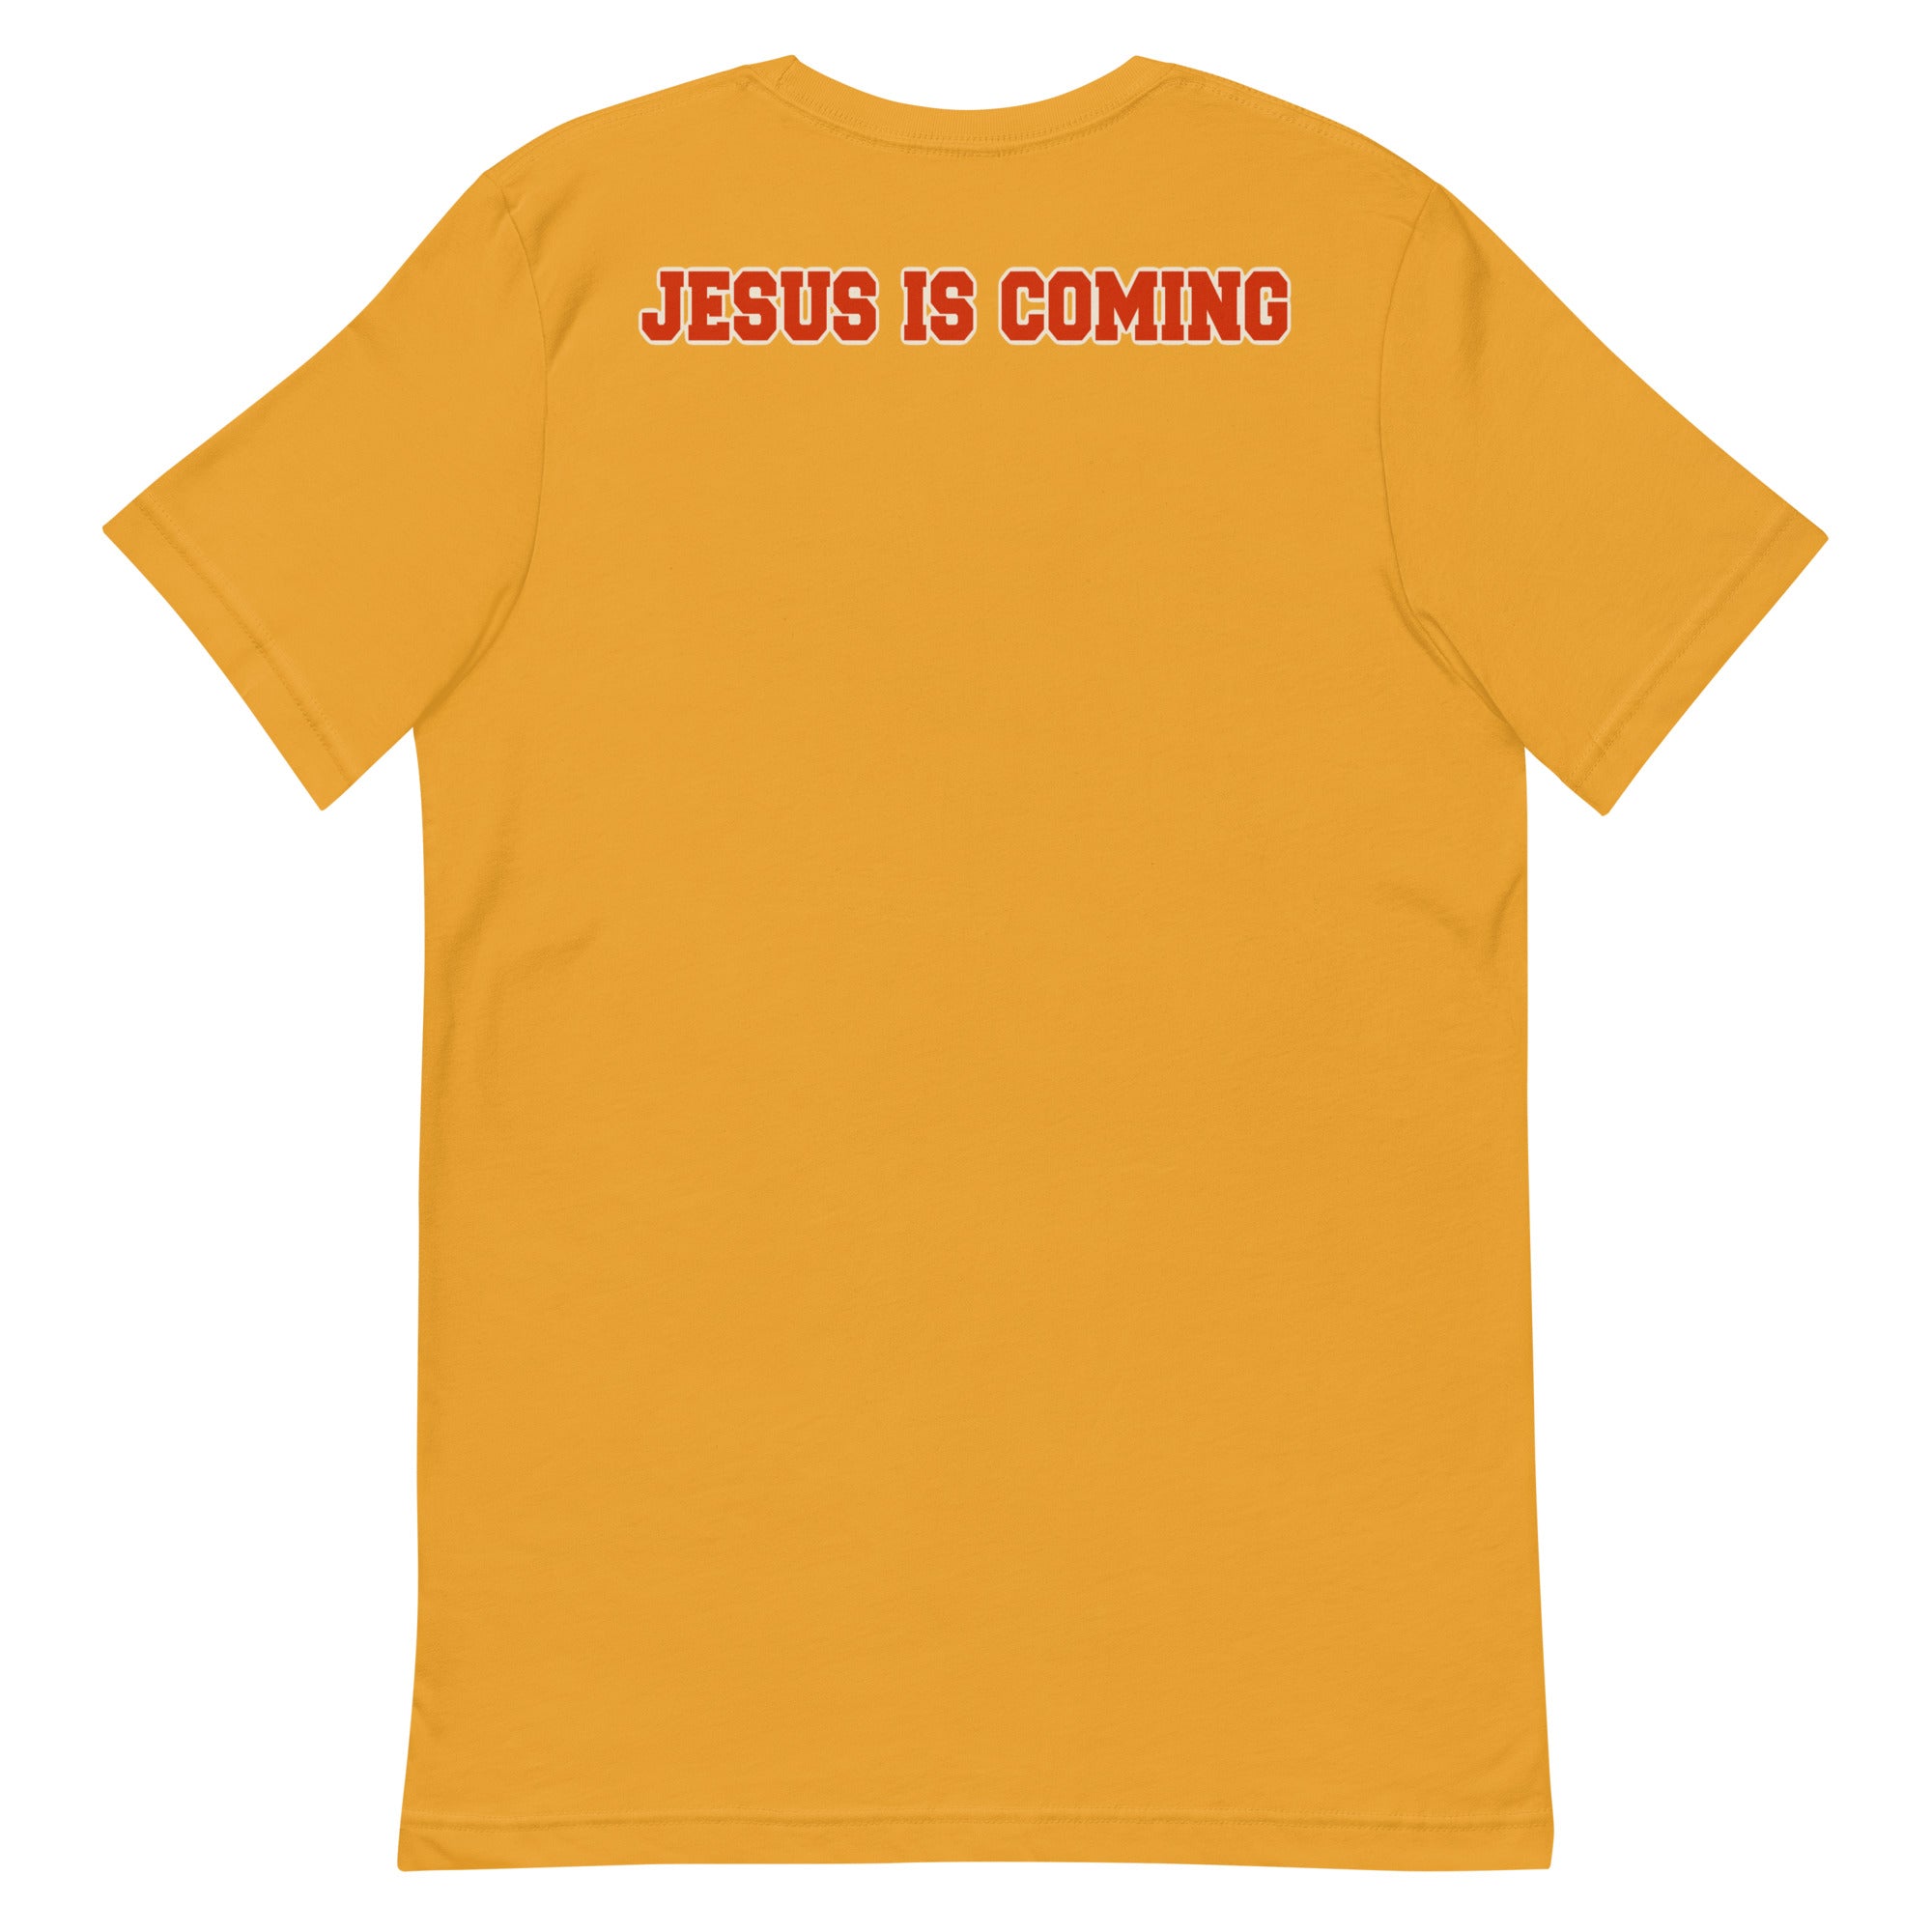 The 2nd Coming Unisex t-shirt